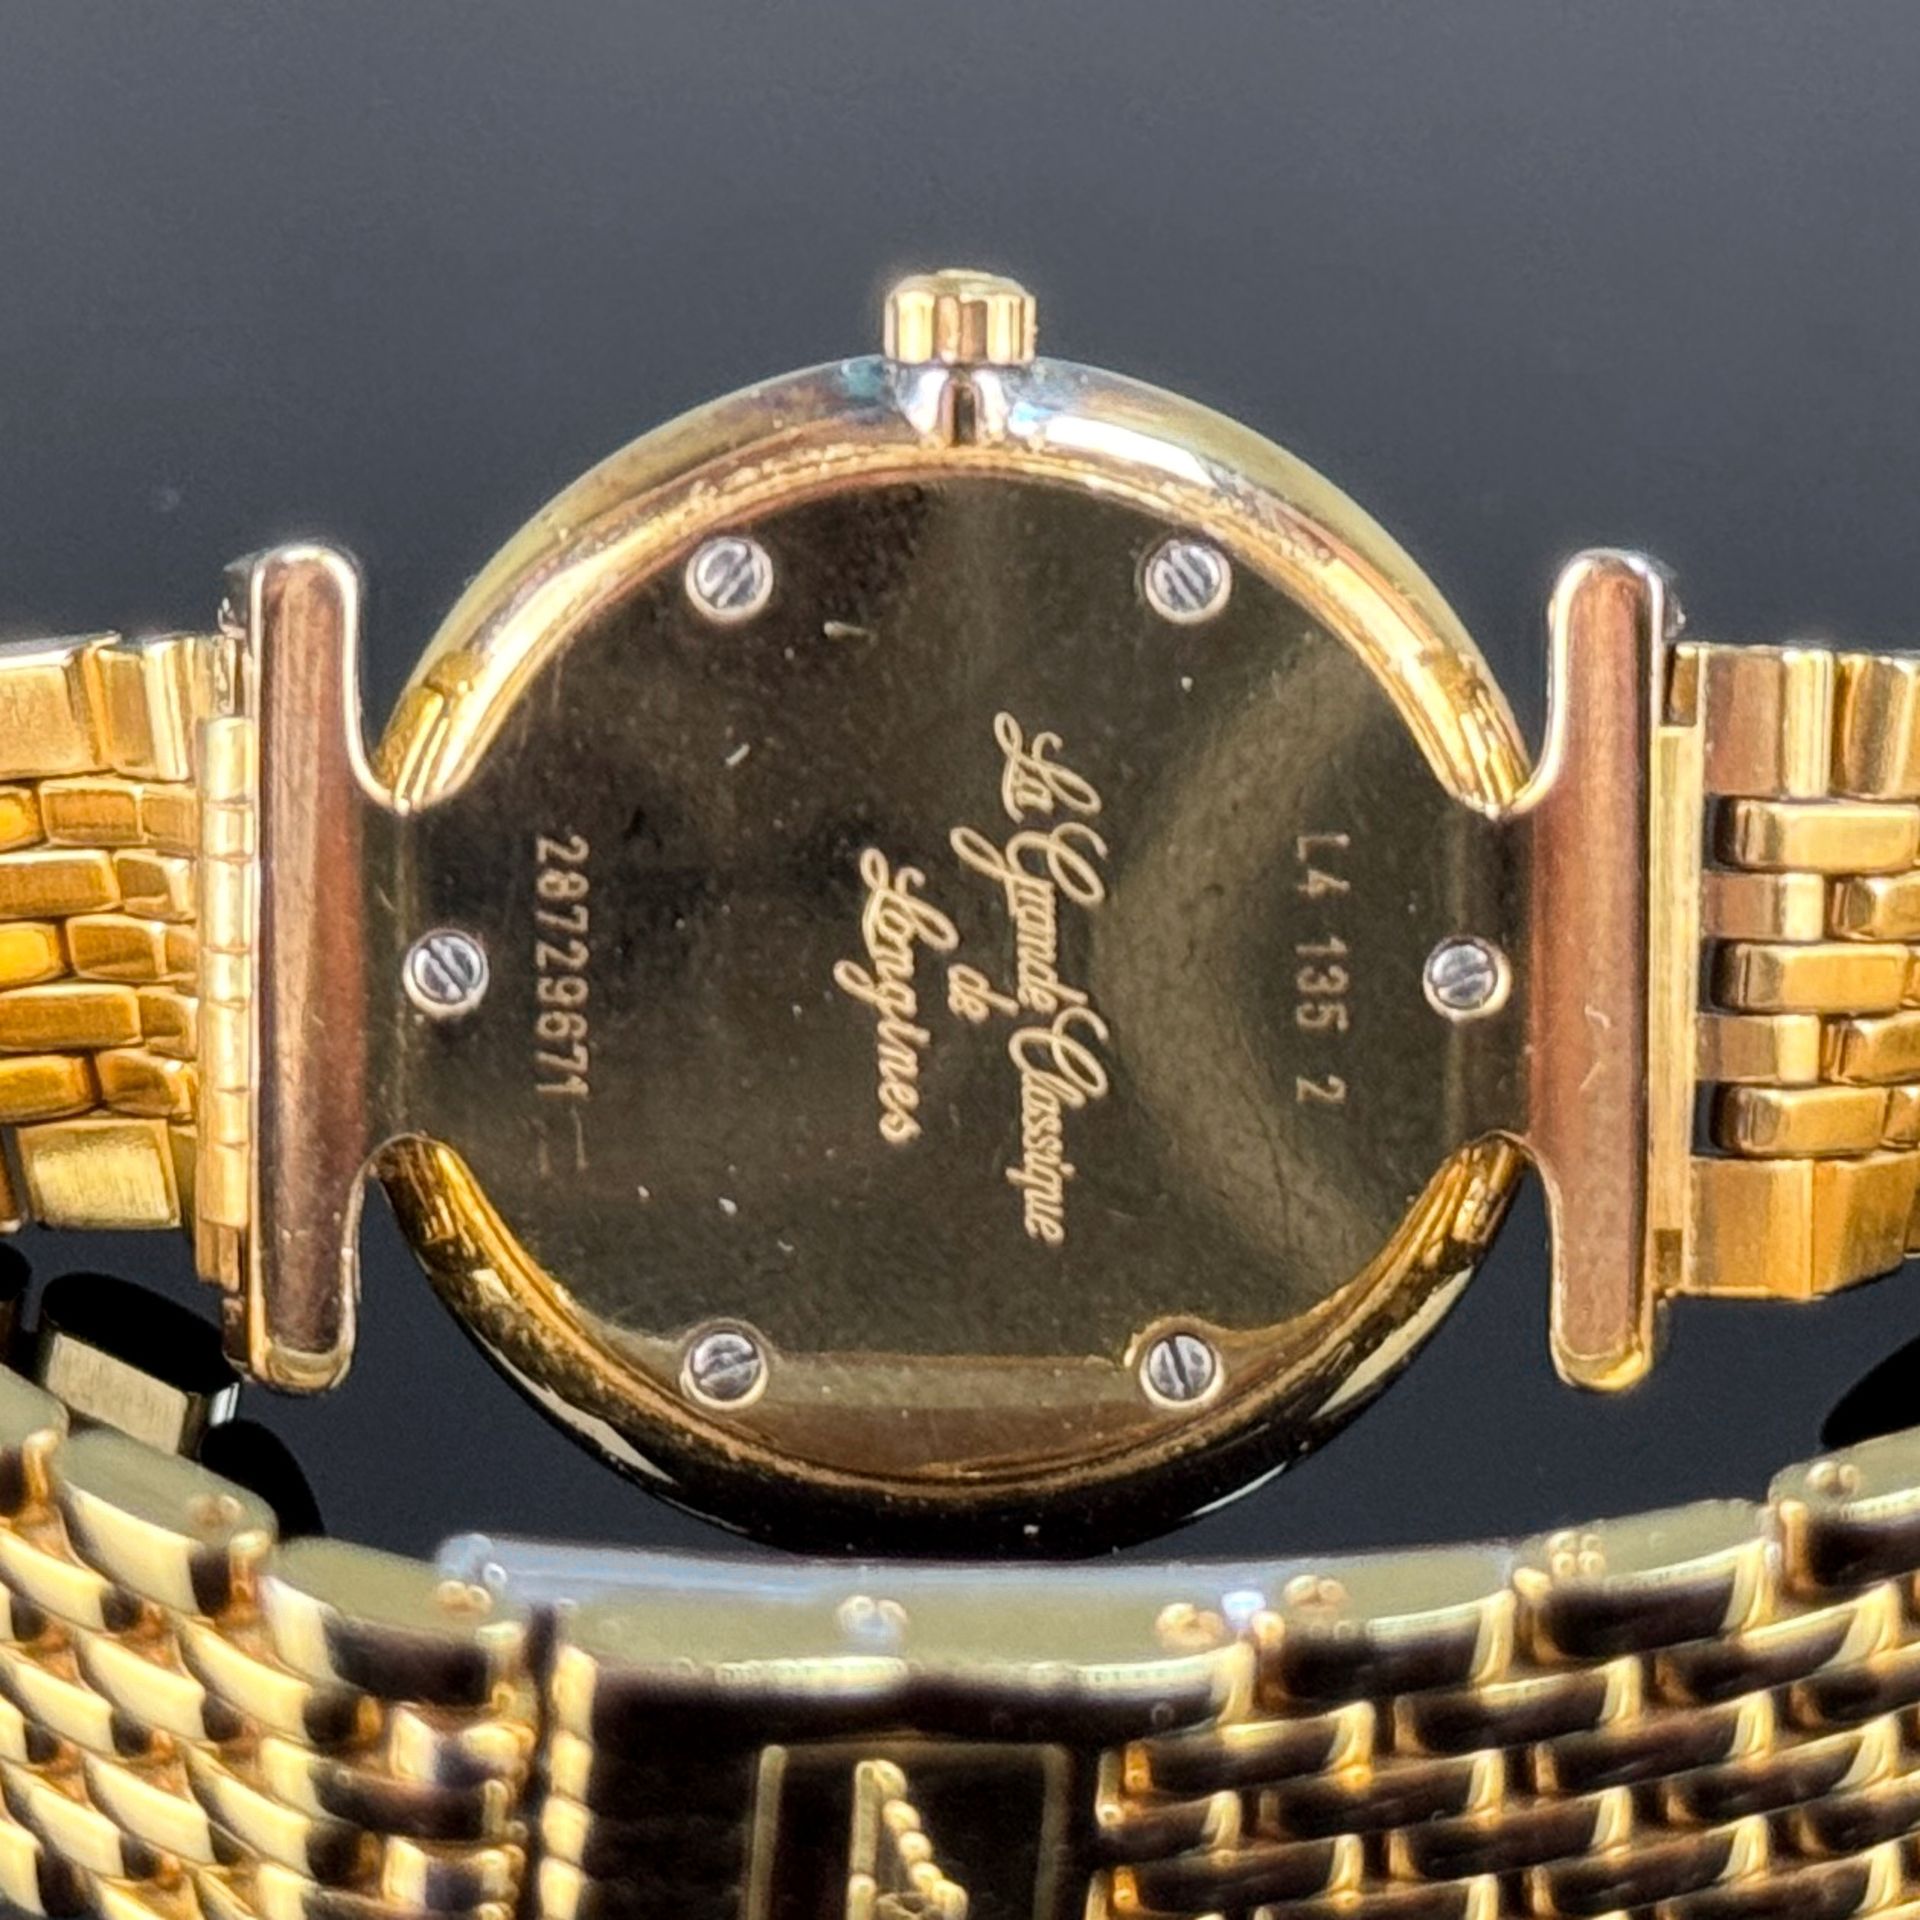 Wristwatch, Longines "La grande classique", gold-plated steel, reference L4.135.2, movement no. 287 - Image 3 of 3